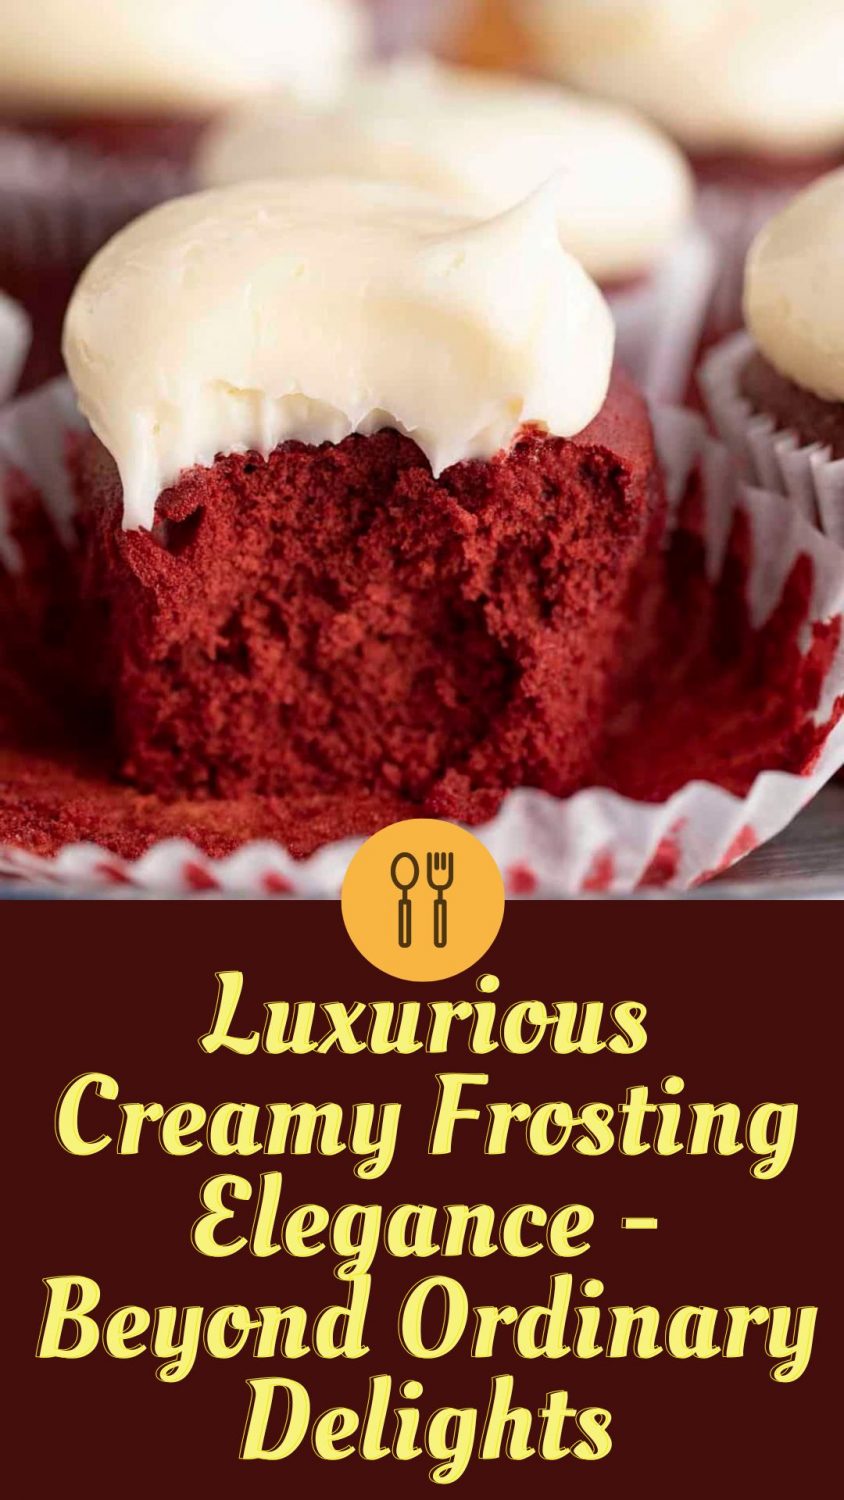 Luxurious Creamy Frosting Elegance - Beyond Ordinary Delights